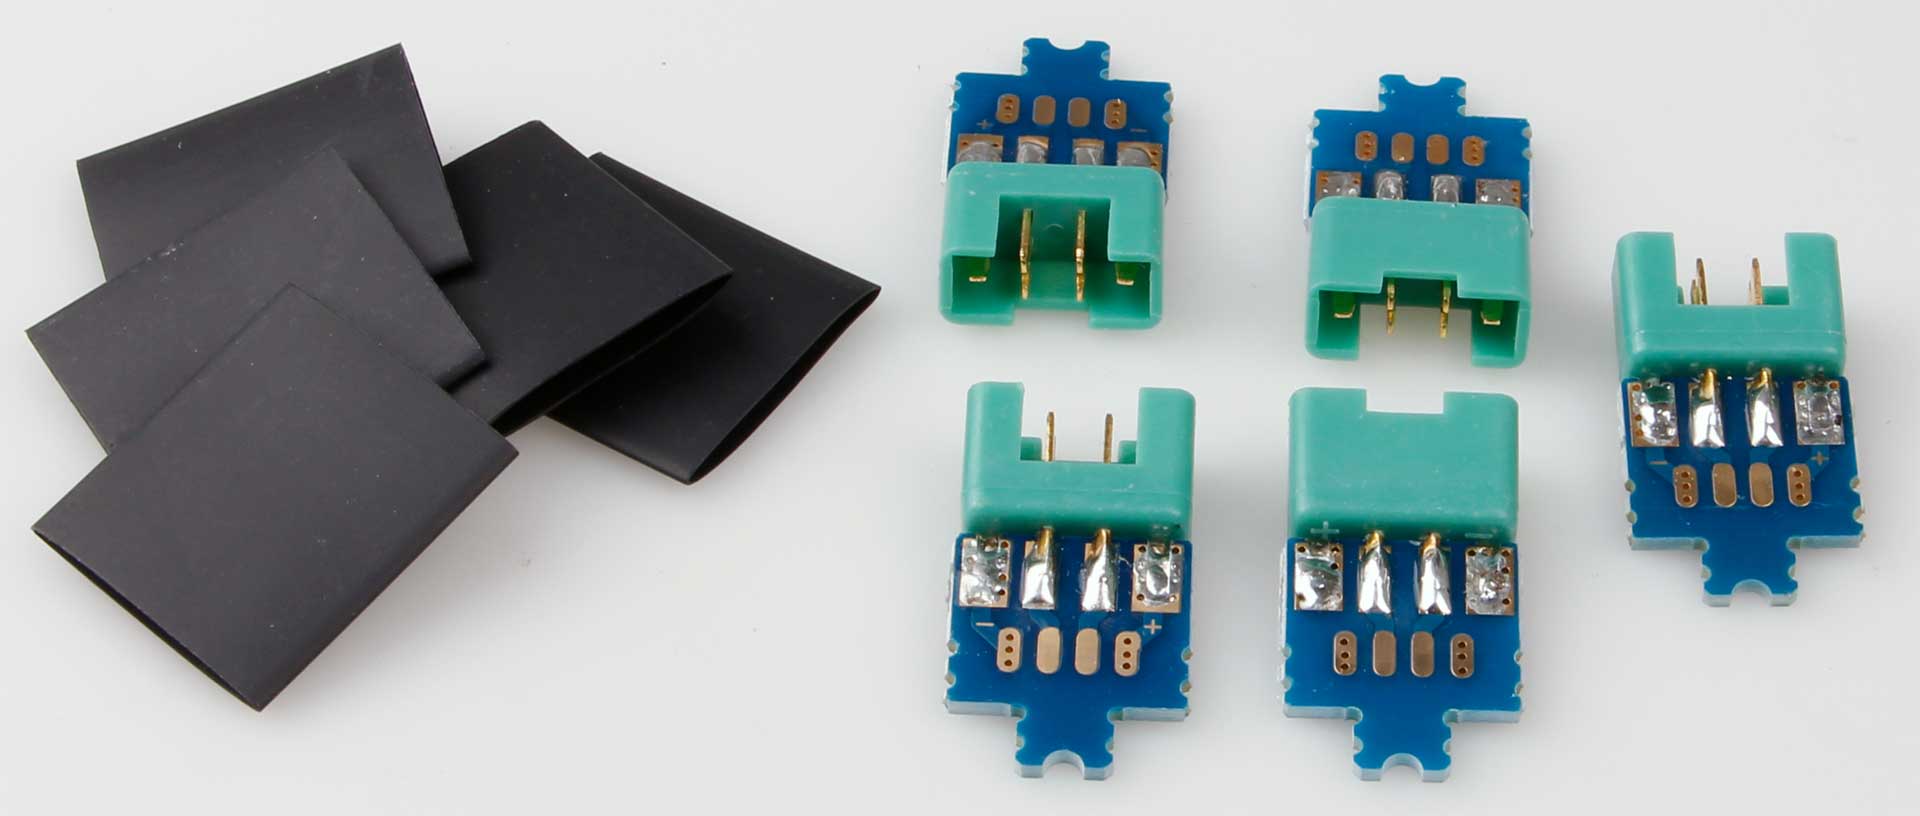 Robbe Modellsport solder board 6-pin MPX "Hochstrom" connector system with male (contact = male) 5 pcs